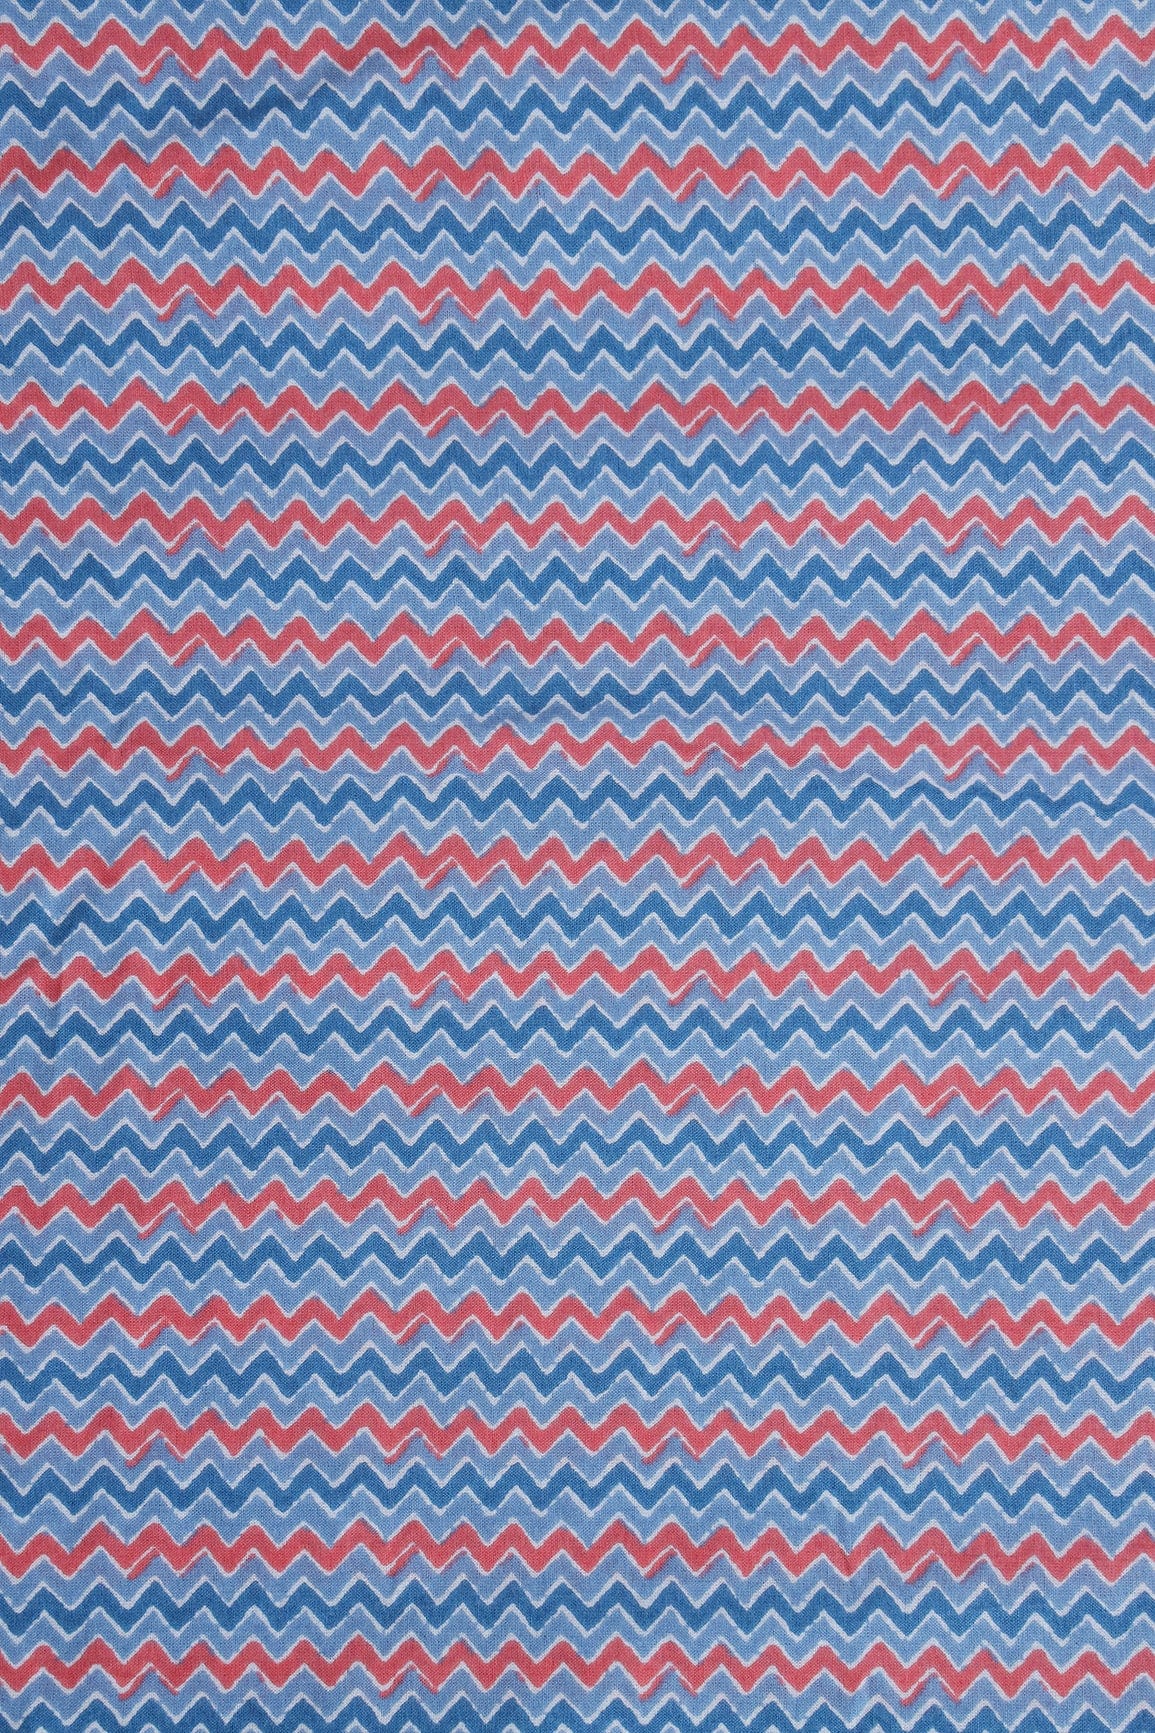 doeraa Prints Airforce Blue And Pastel Red Chevron Print On Pure Mul Cotton Fabric